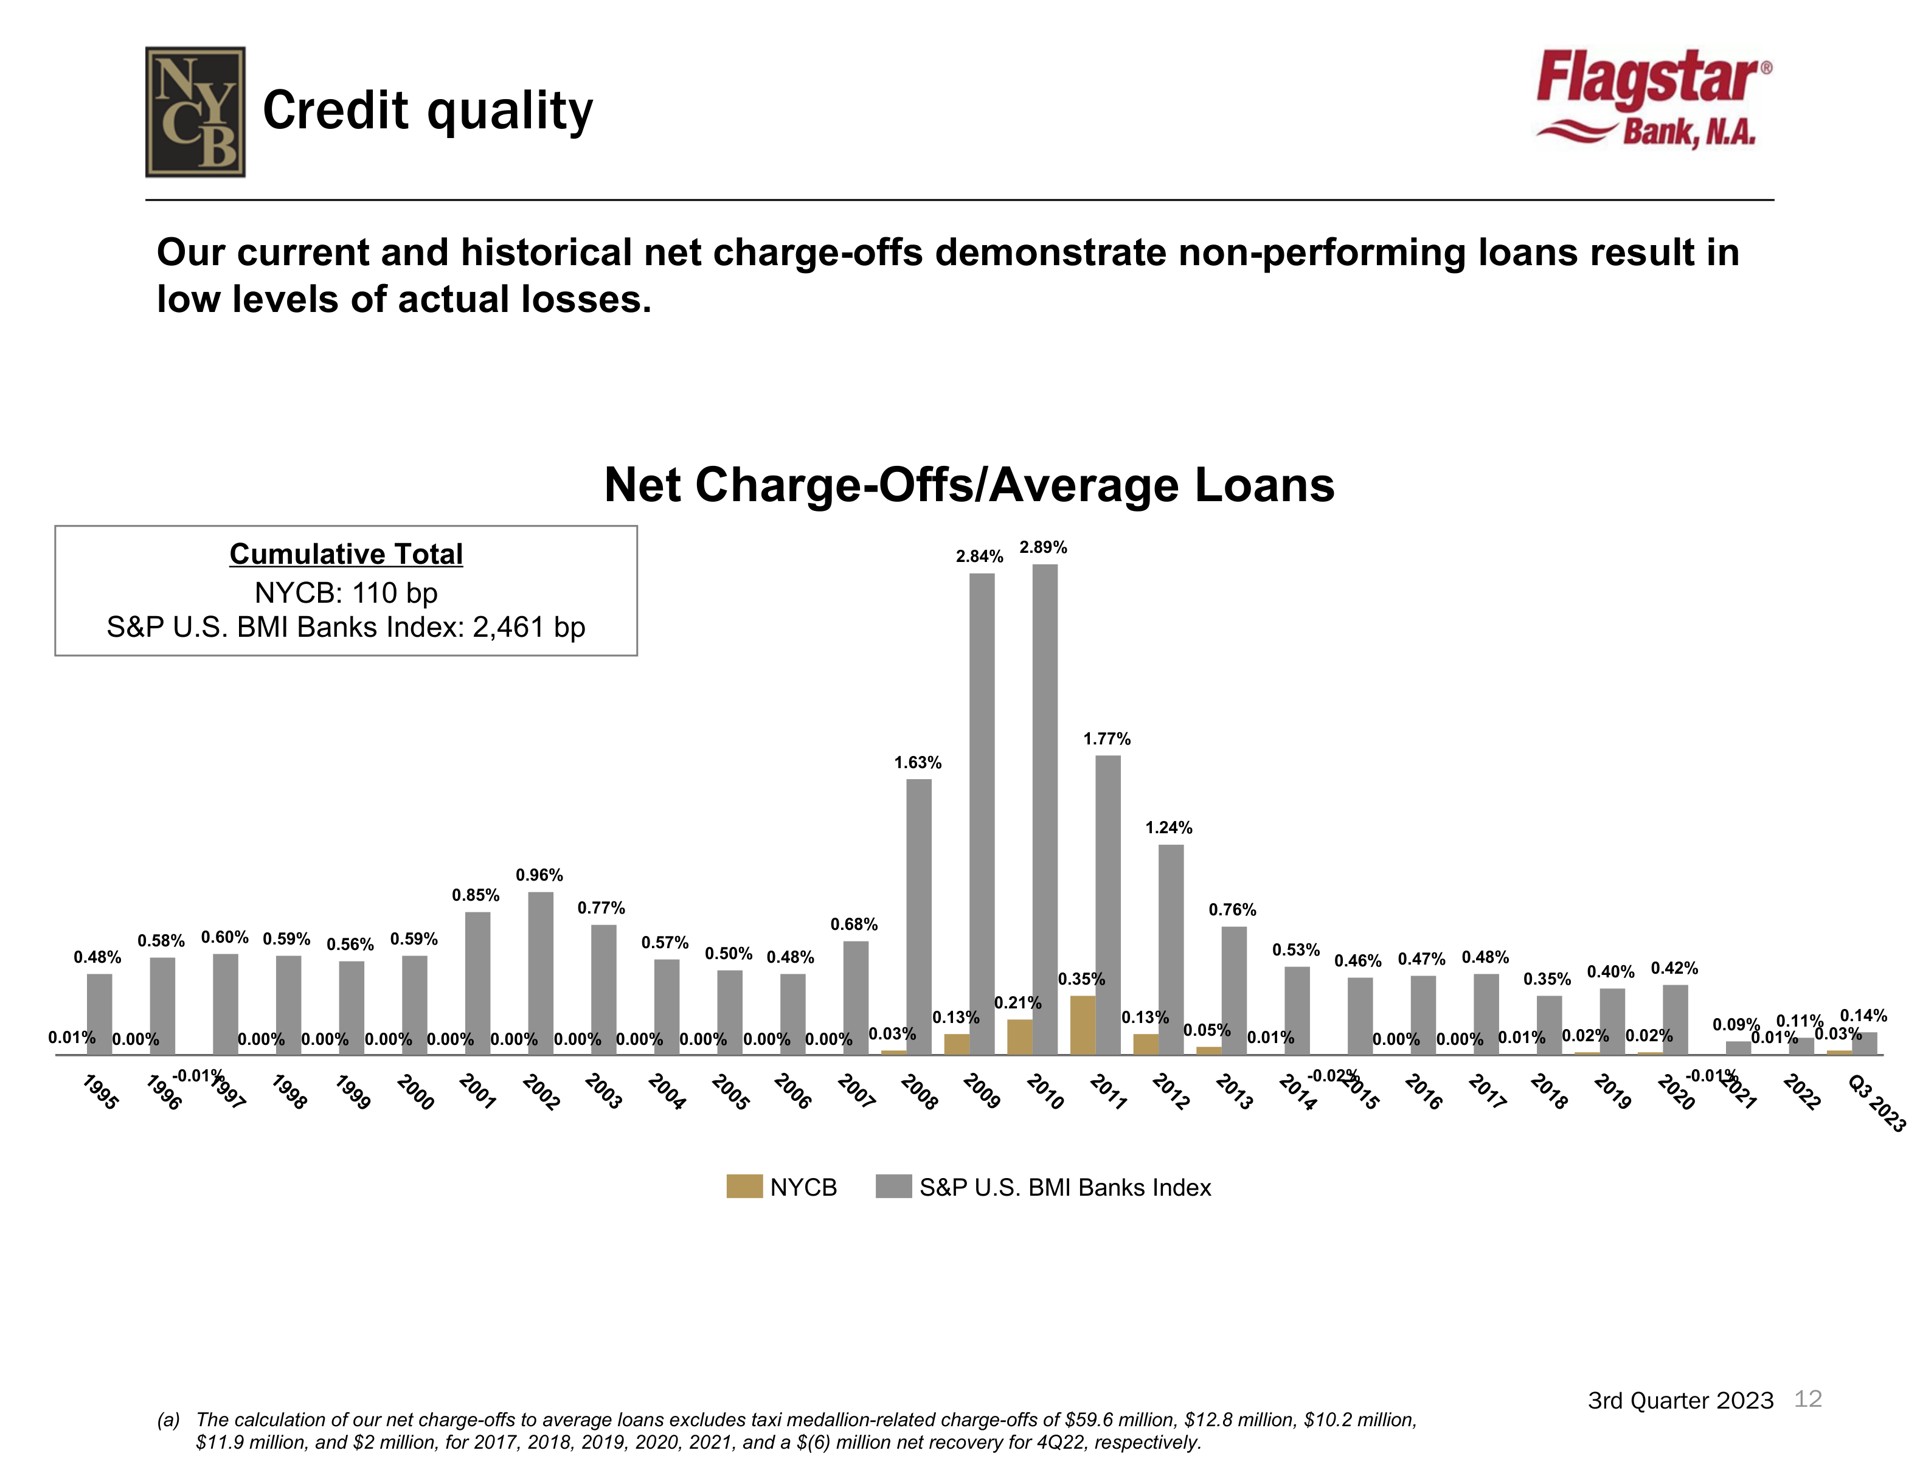 credit quality bank net charge offs average loans | New York Community Bancorp